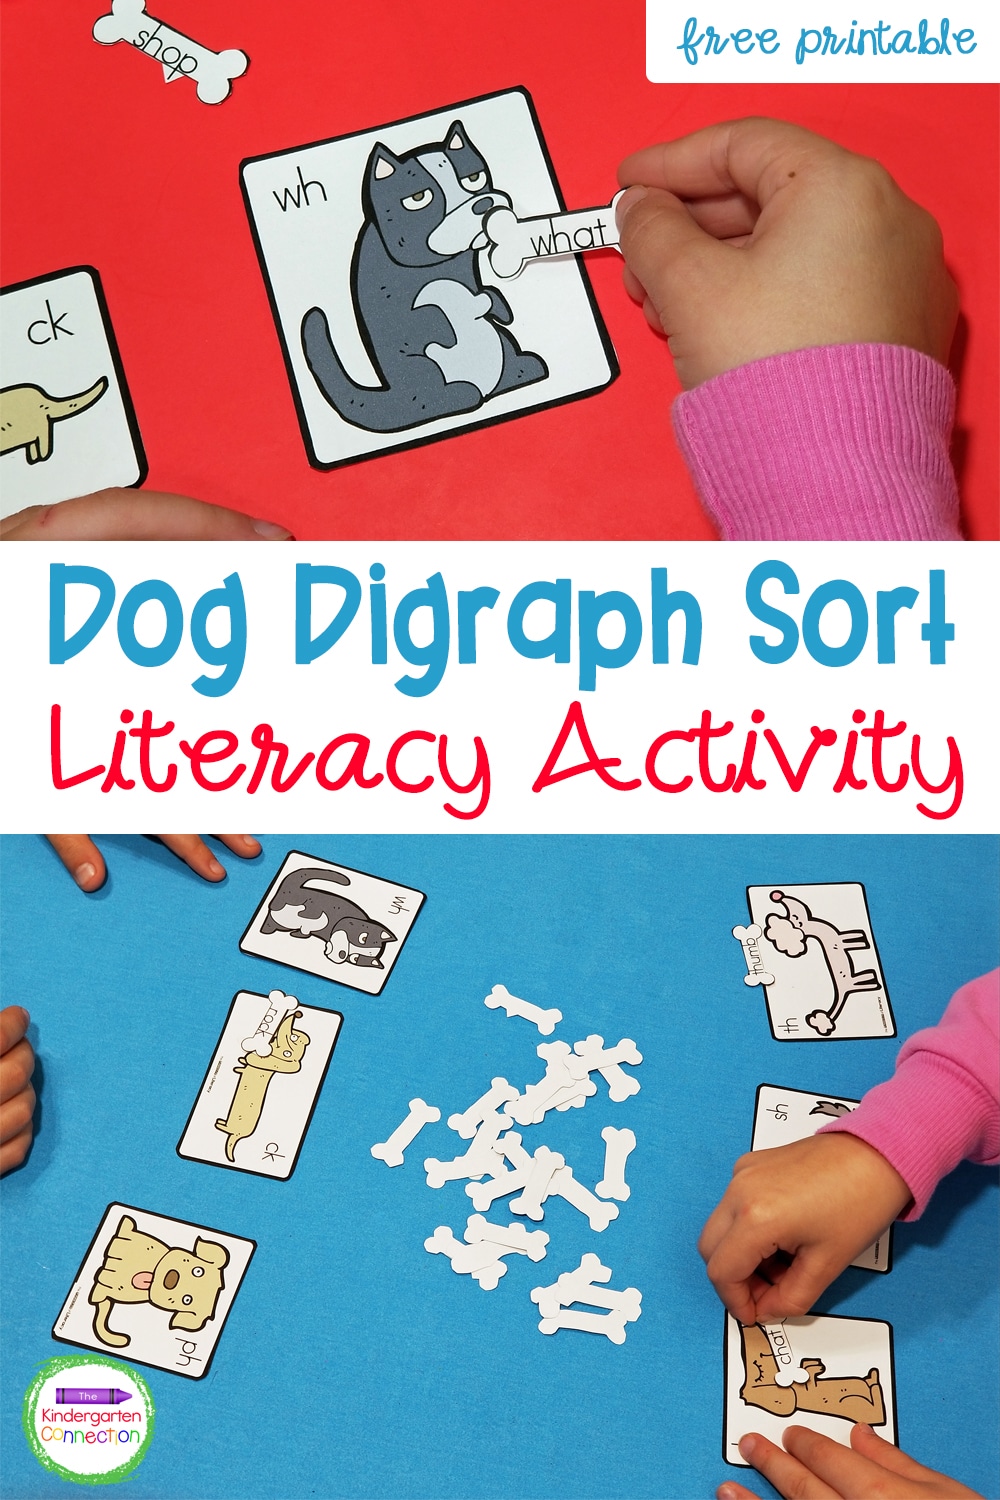 This free Dog Digraph Word Sort Activity is great for literacy centers, small groups, or partner work in Kindergarten or early 1st grade!